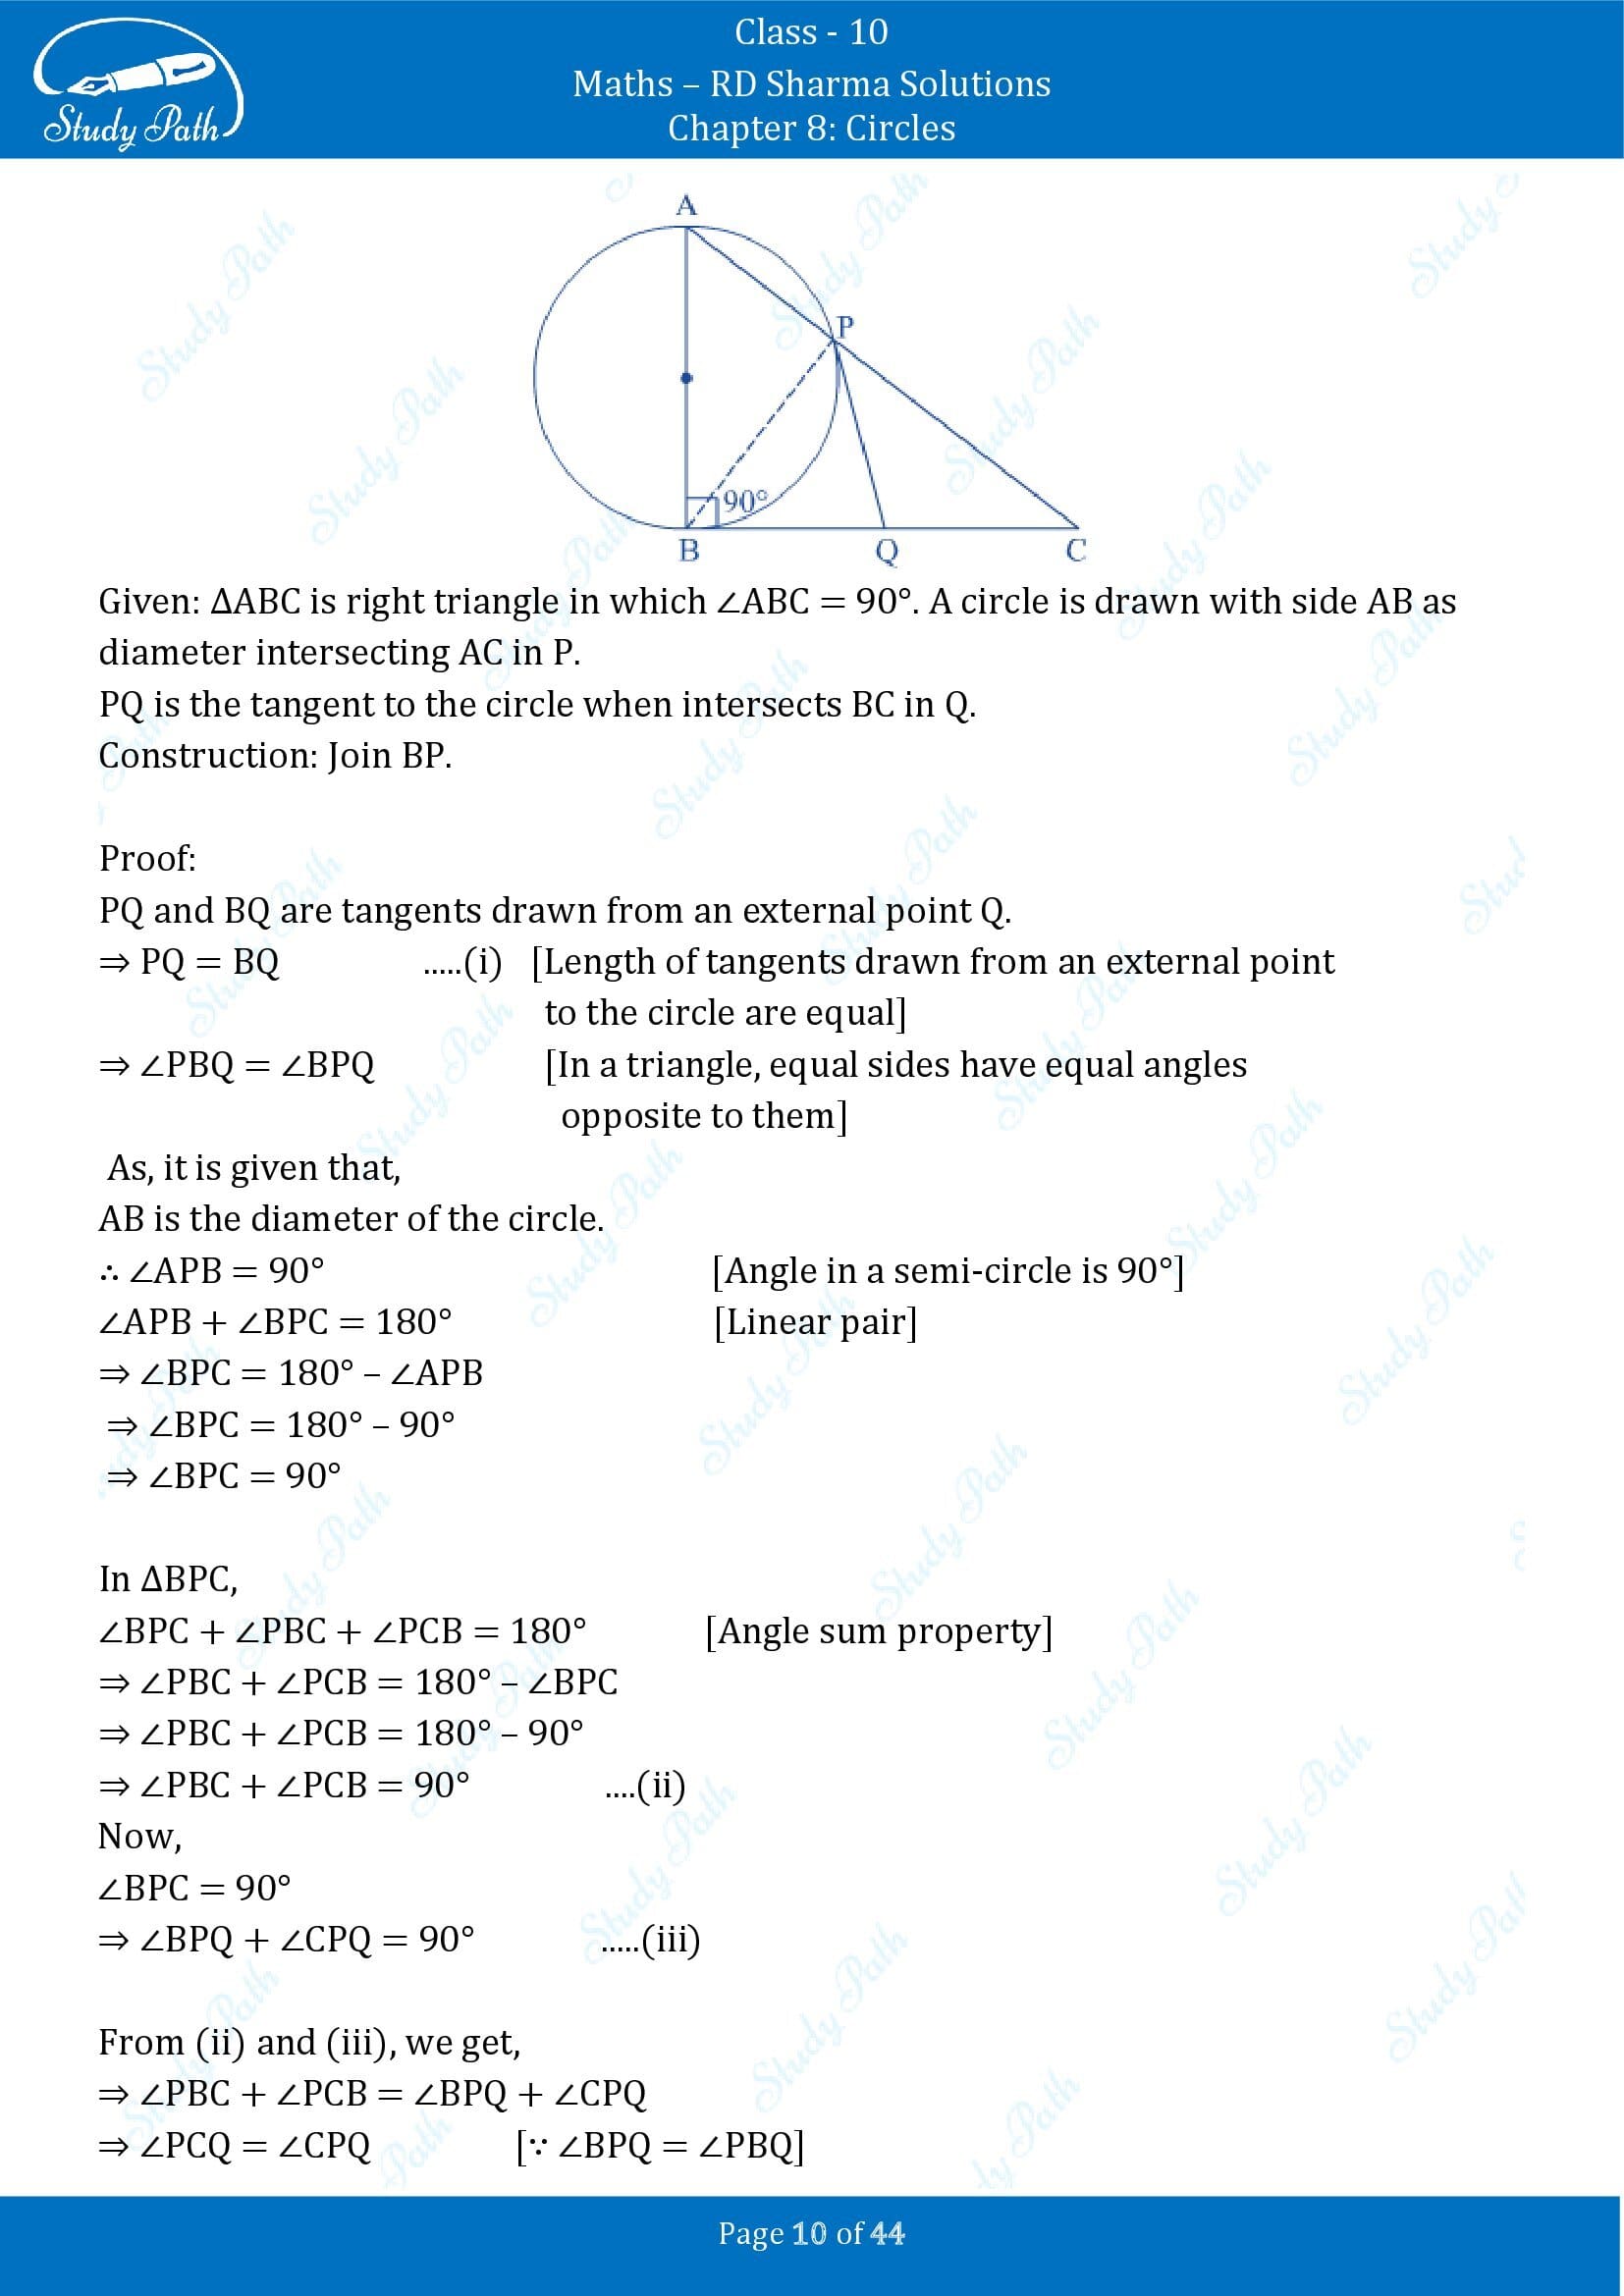 RD Sharma Solutions Class 10 Chapter 8 Circles Exercise 8.2 00010